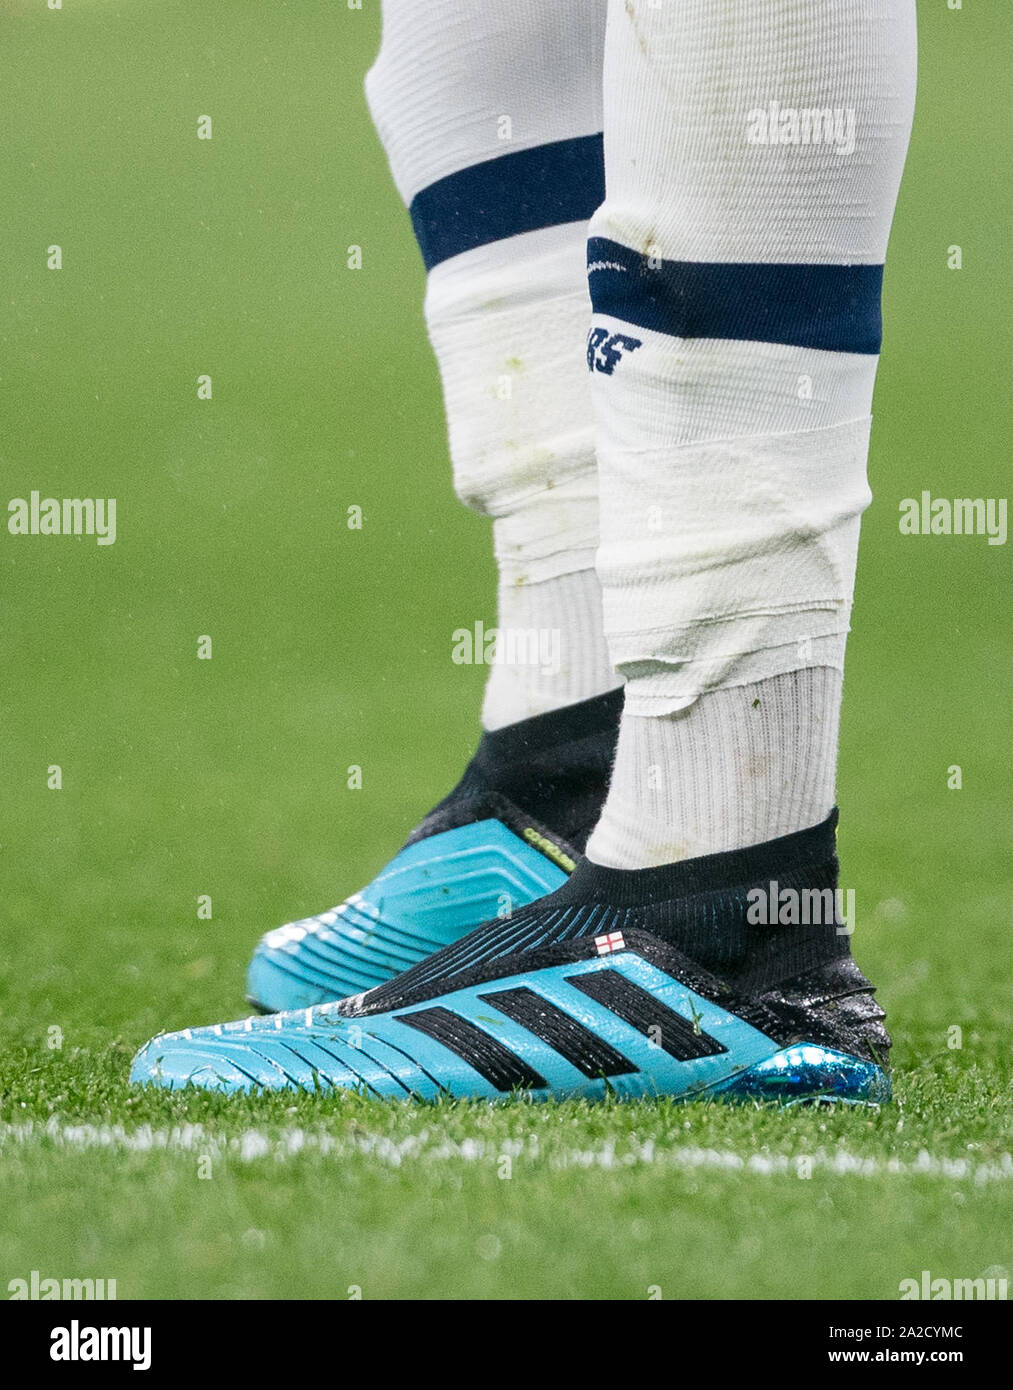 The Adidas football boots of Dele Alli of Spurs with England flag during  the UEFA Champions League group match between Tottenham Hotspur and Bayern  Munich at Wembley Stadium, London, England on 1